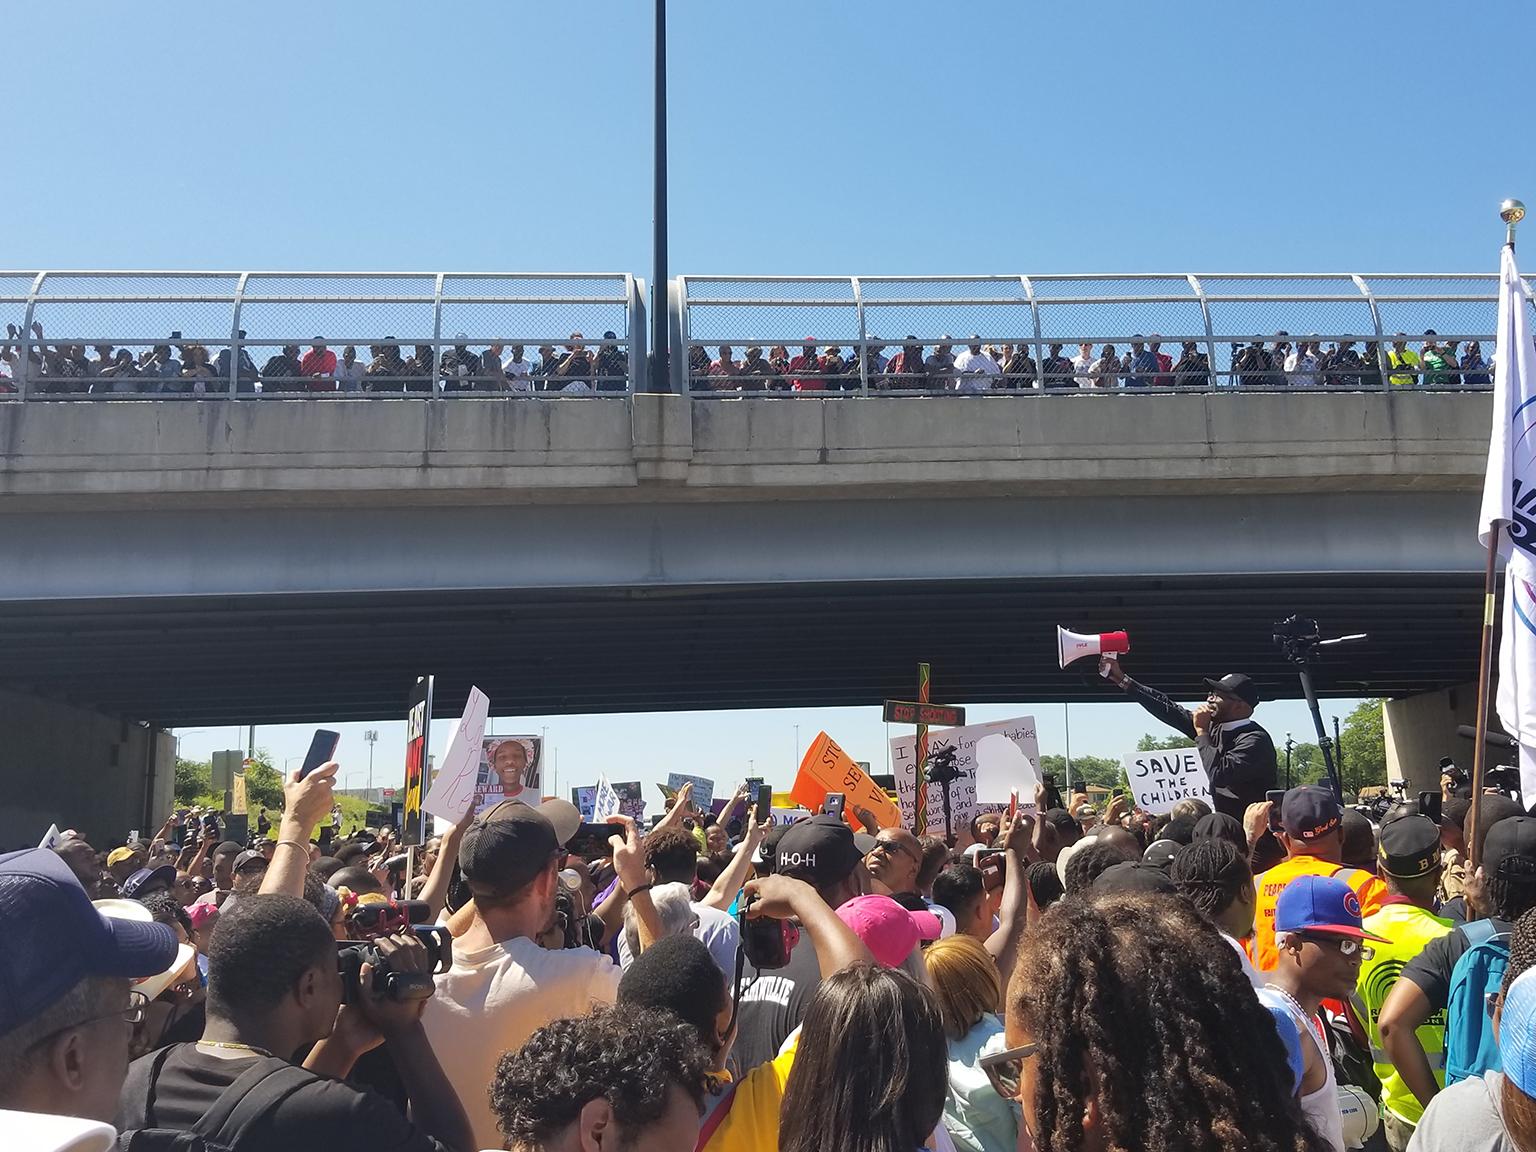 Protesters pause at the 76th Street overpass on the Dan Ryan Expressway on July 7, 2018. (Matt Masterson / Chicago Tonight)